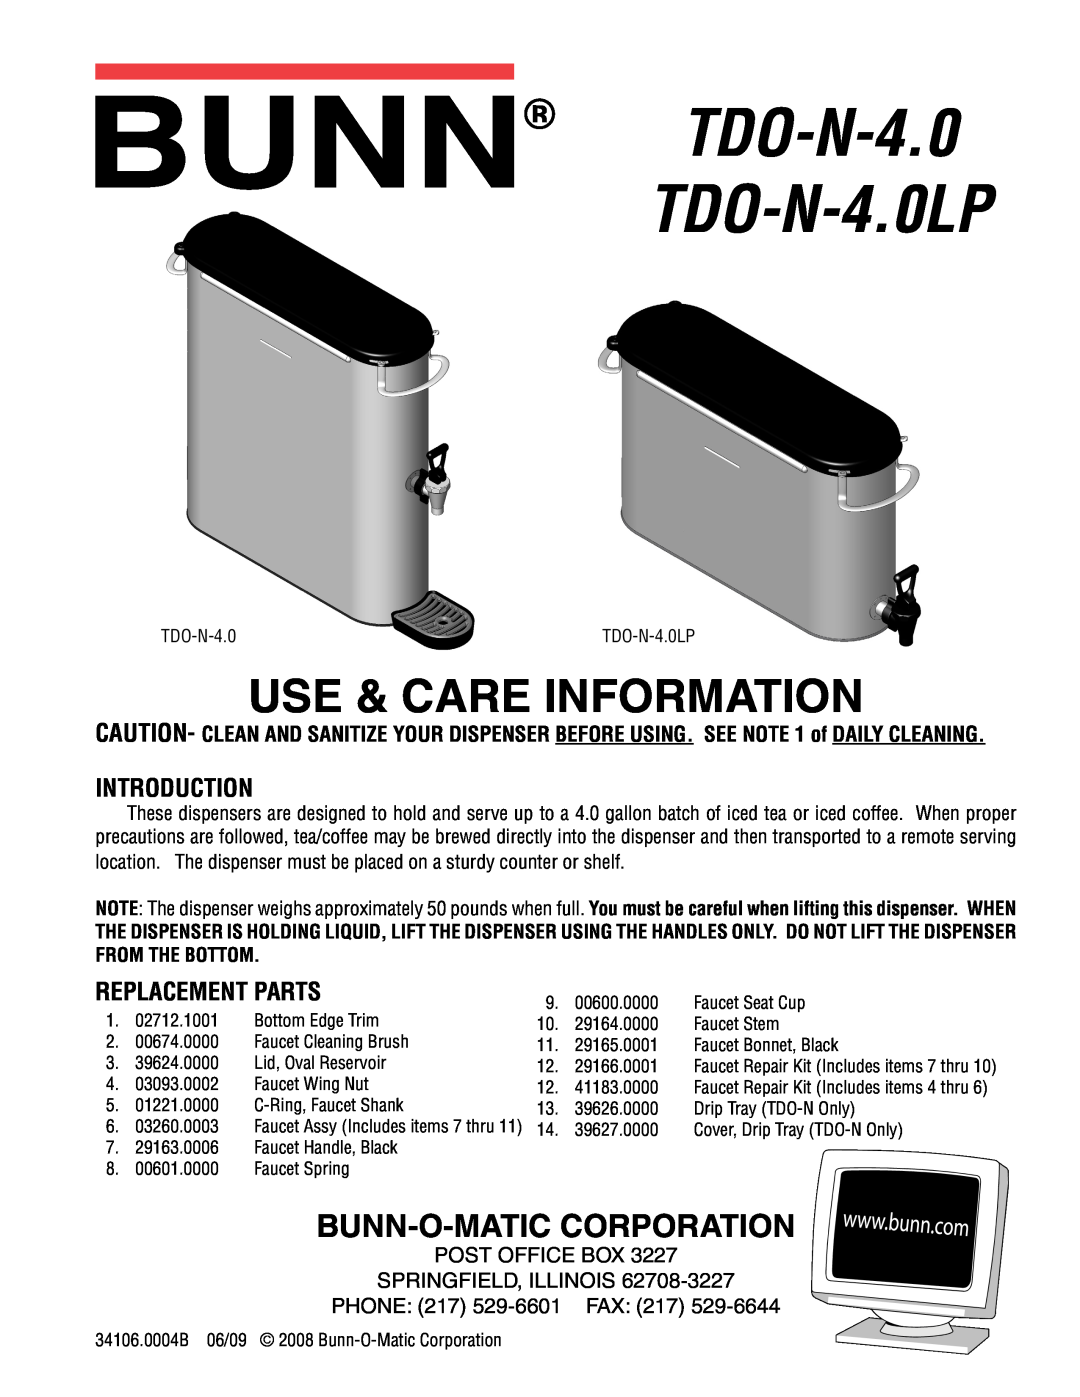 Bunn manual Introduction, Replacement Parts, TDO-N-4.0 TDO-N-4.0LP, Use & Care Information, Bunn-O-Maticcorporation 